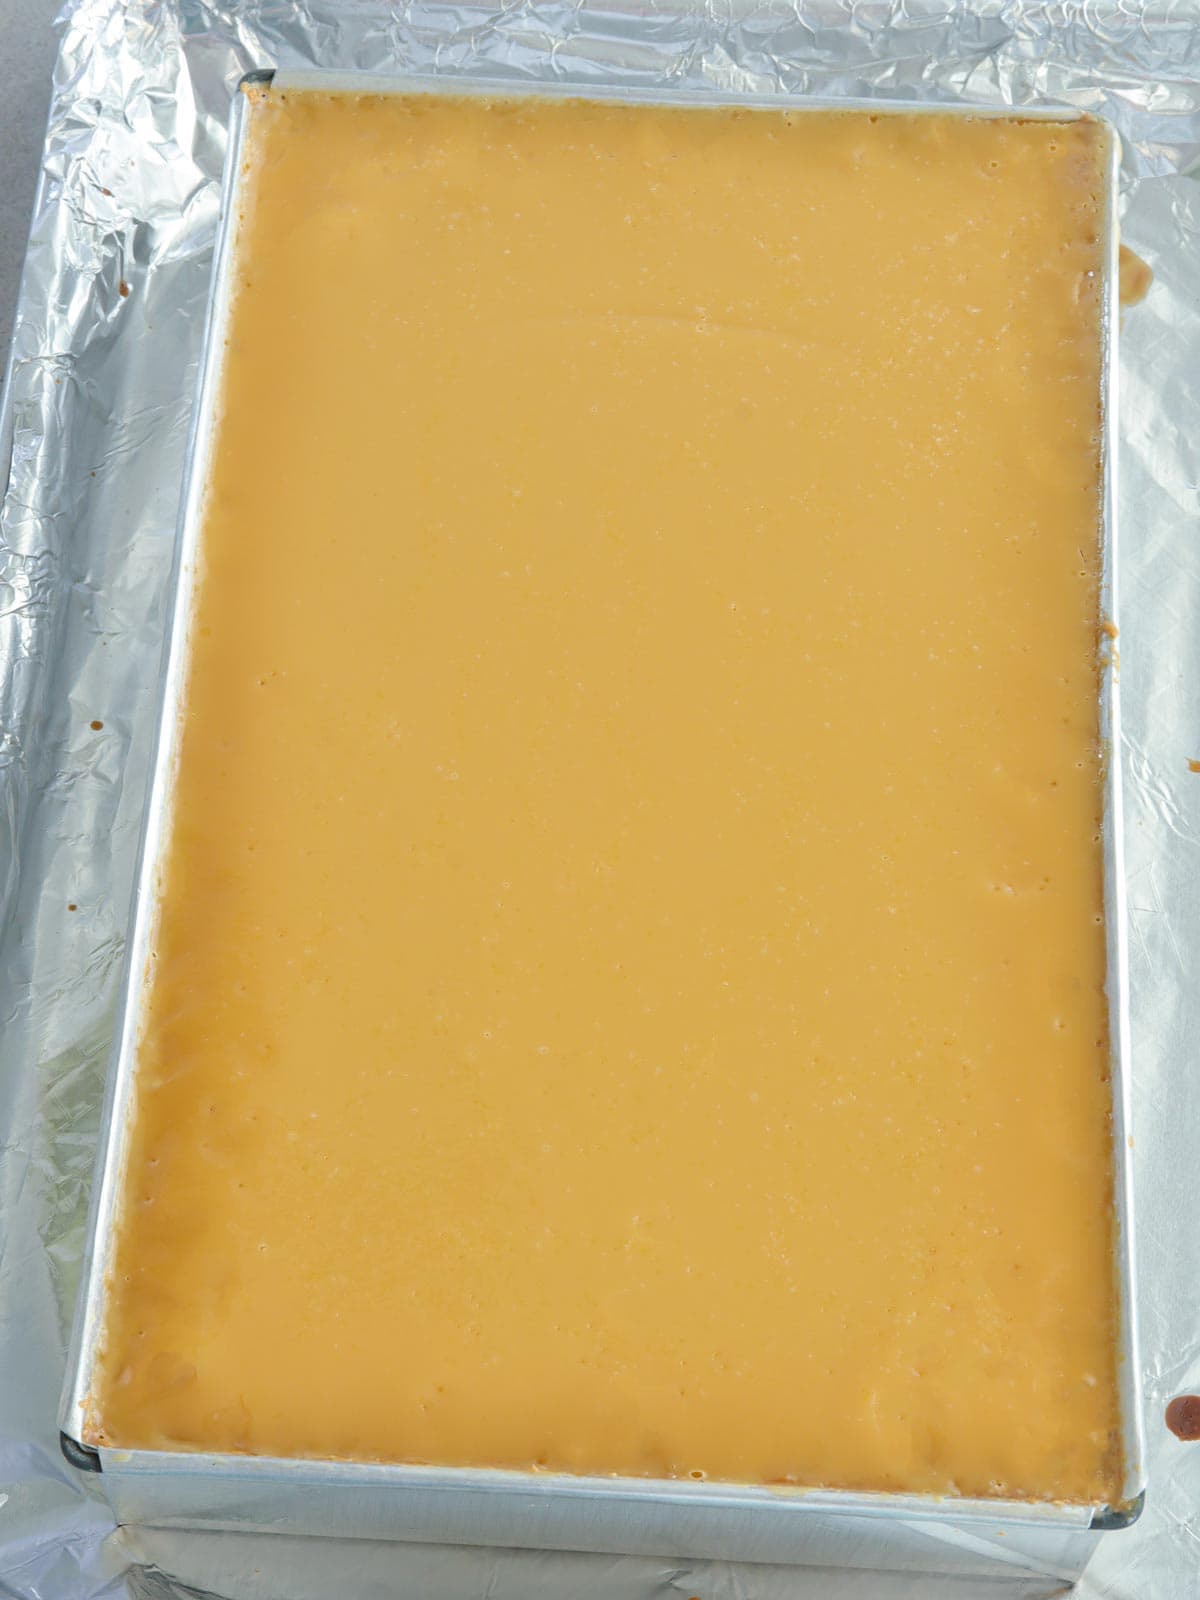 Cassava Cake with Custard Topping in a baking pan.